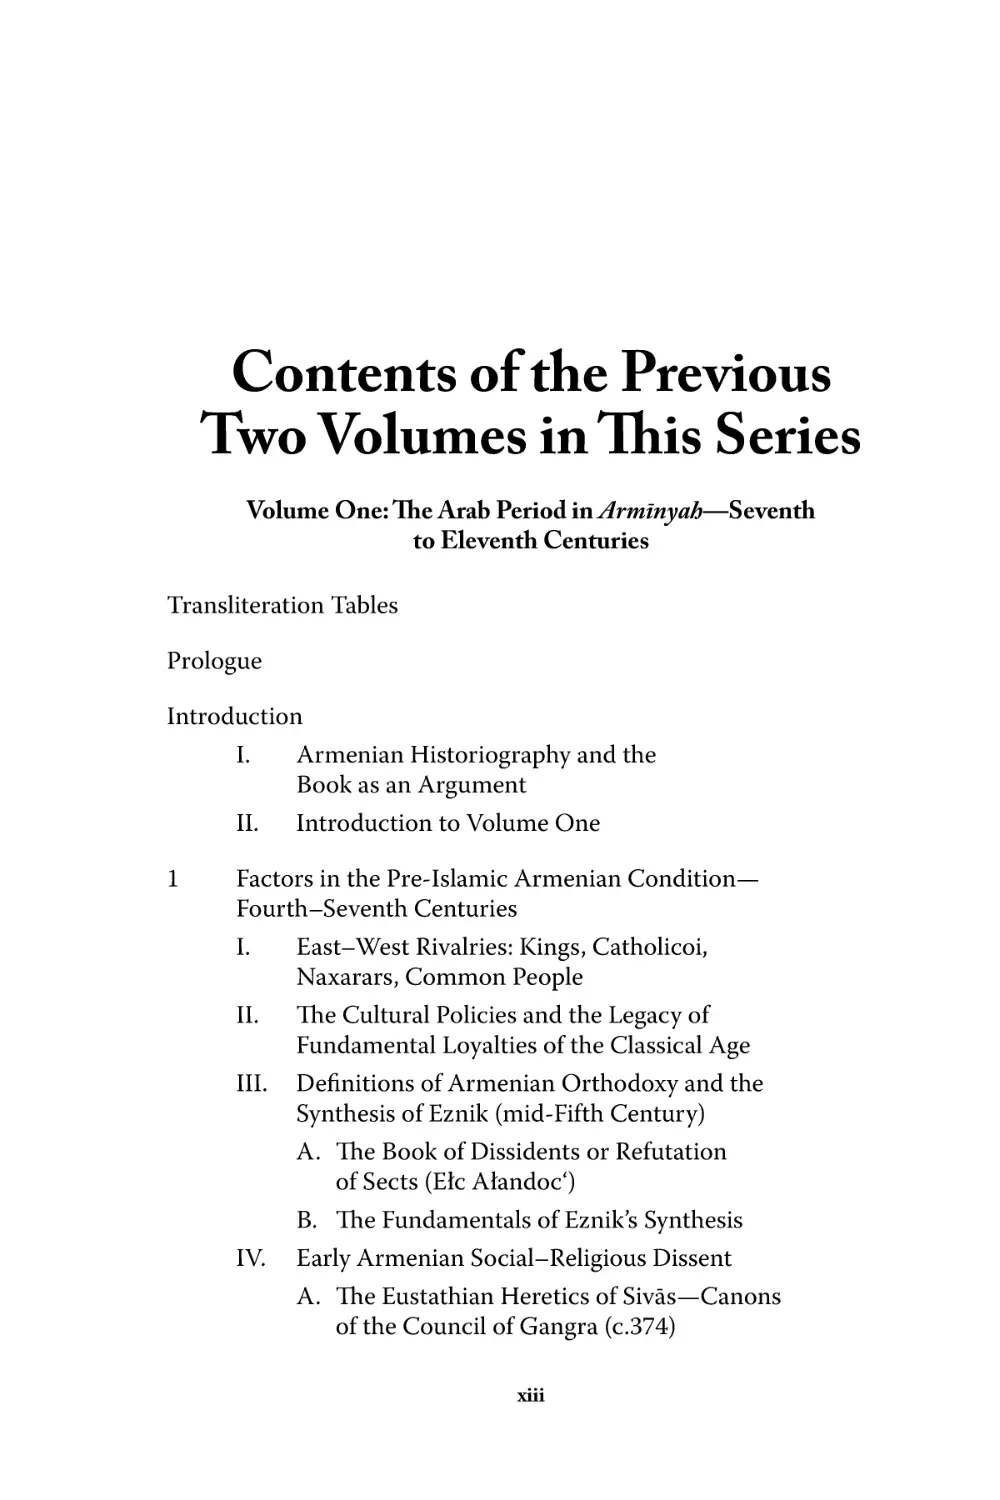 Contents of the Previous Two Volumes in This Series